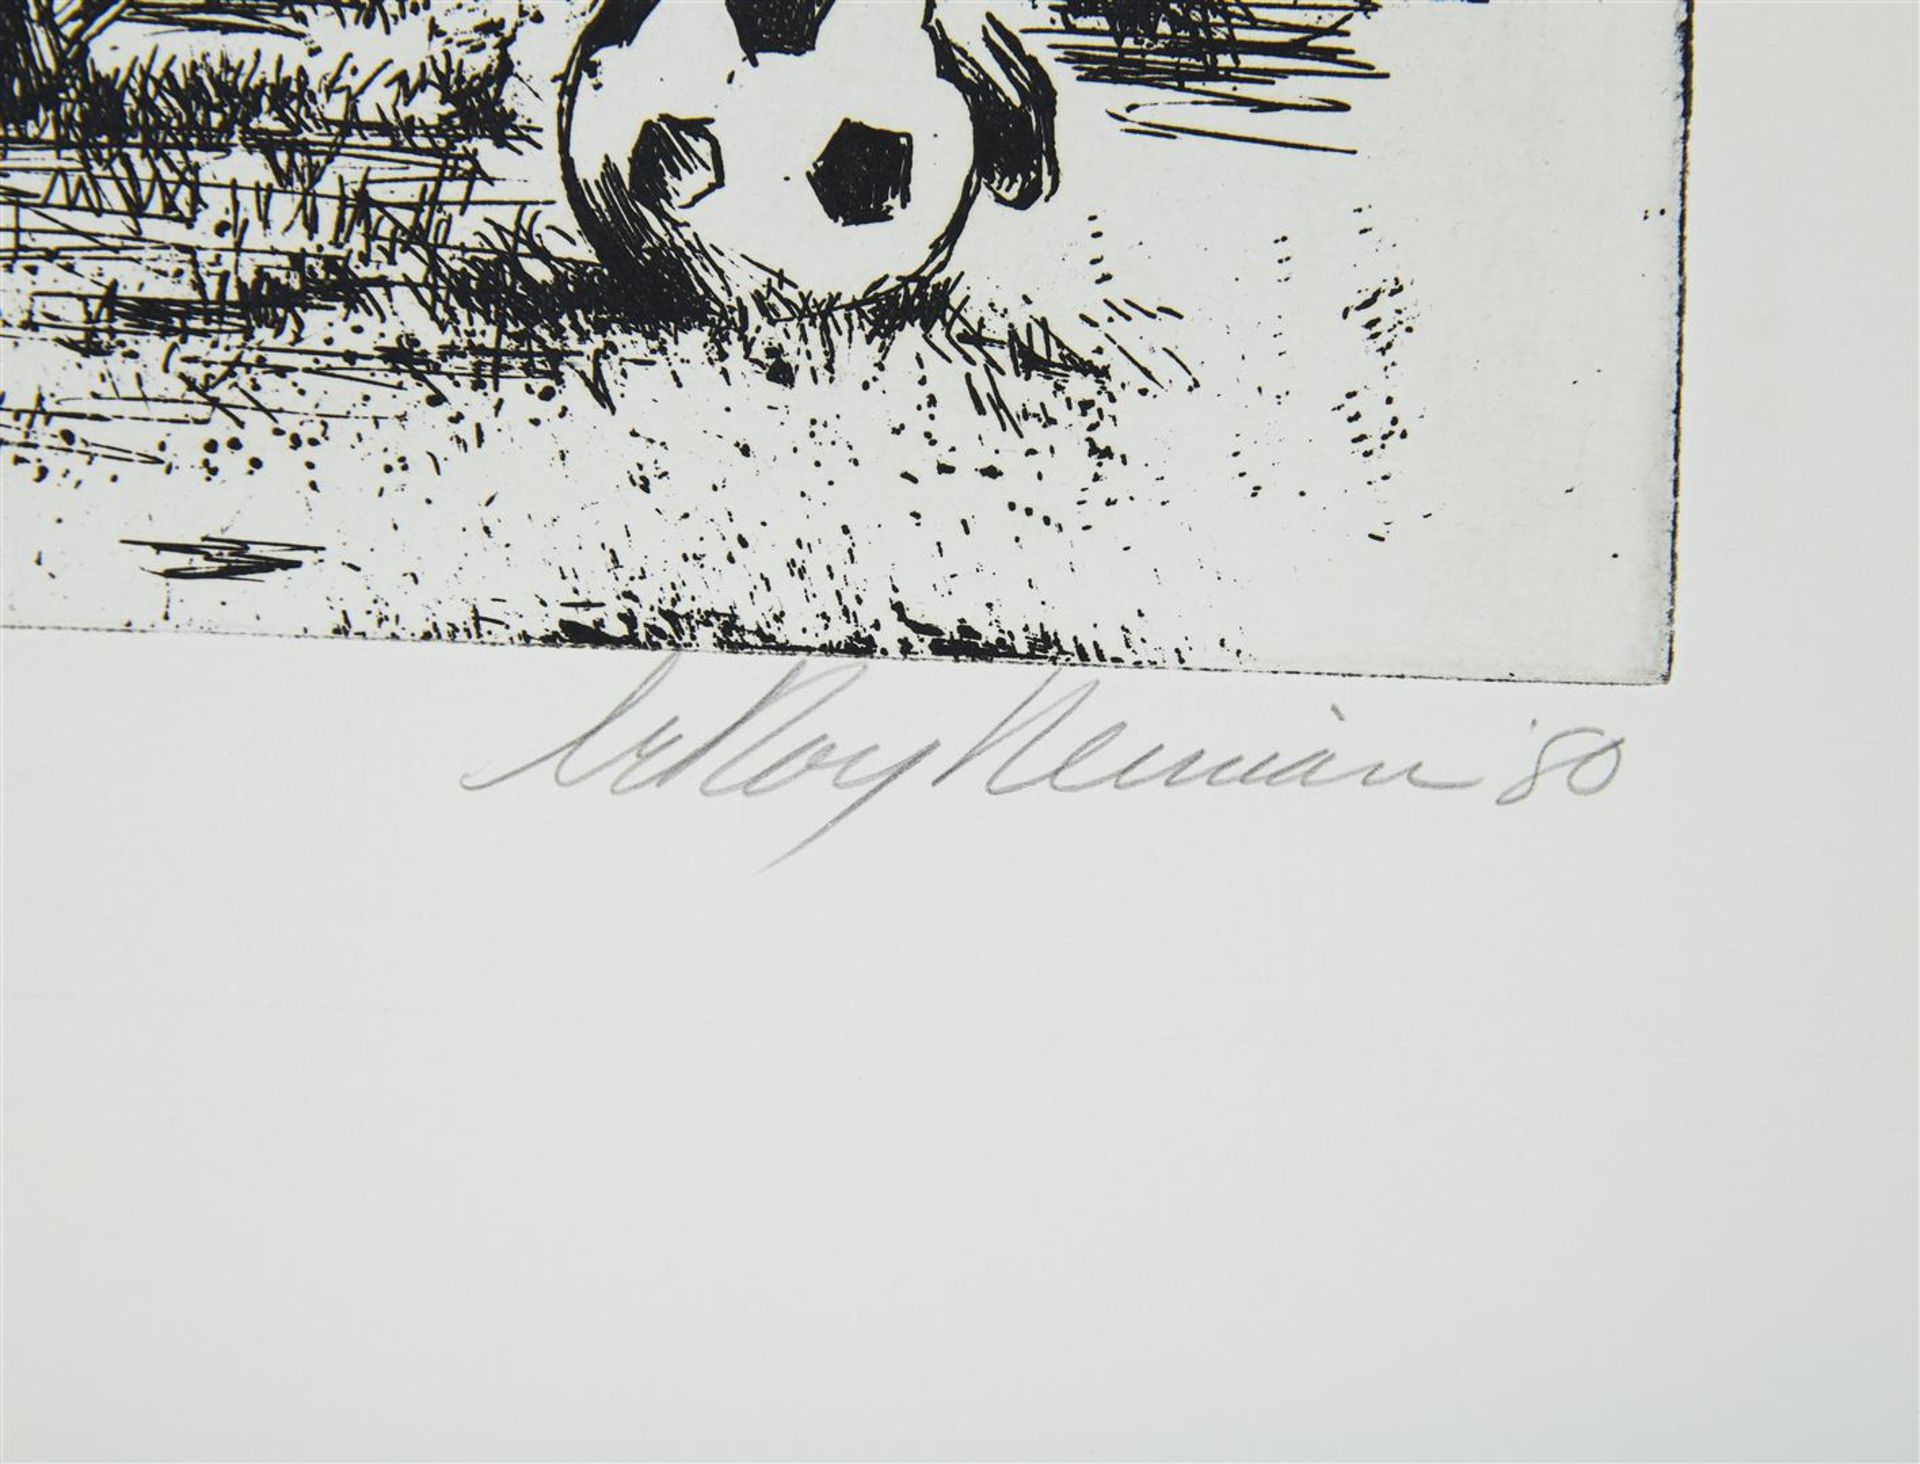 Soccer (Black & White) by LeRoy Neiman 75/250 - Image 2 of 3